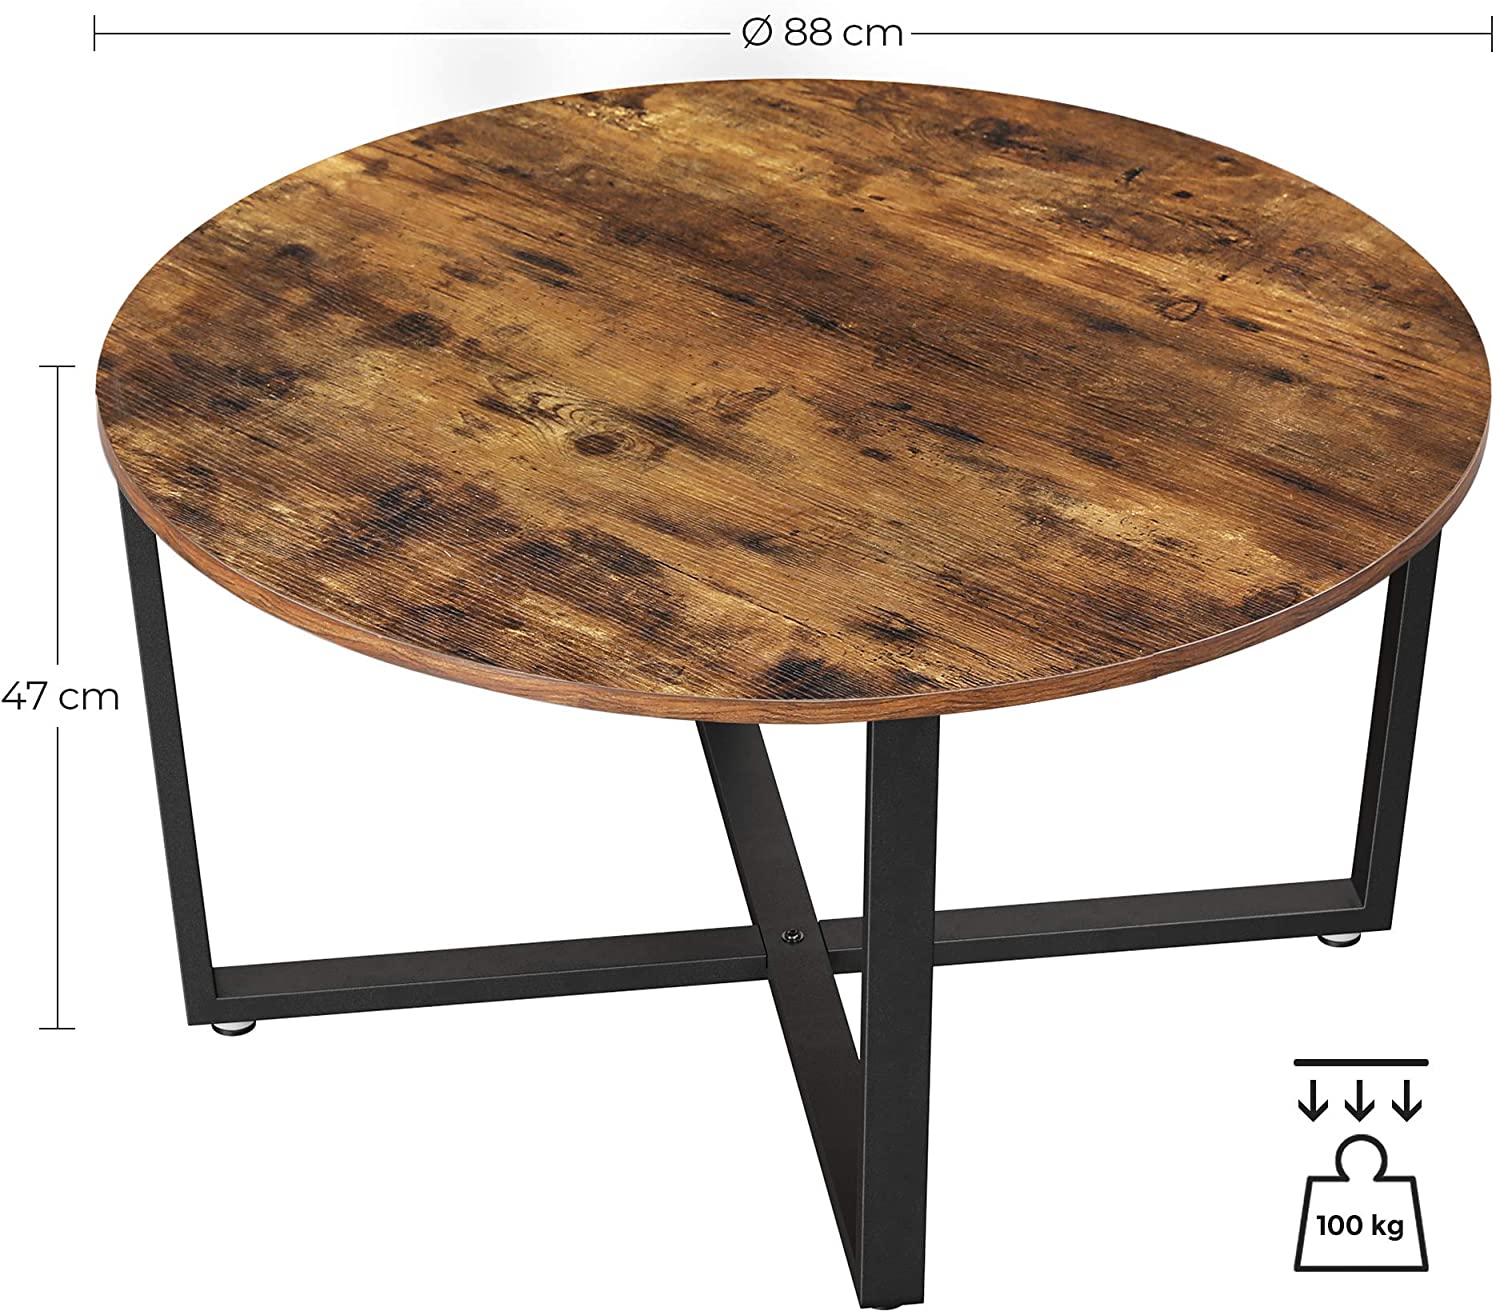 Rena Round Coffee Table Rustic Vintage Style